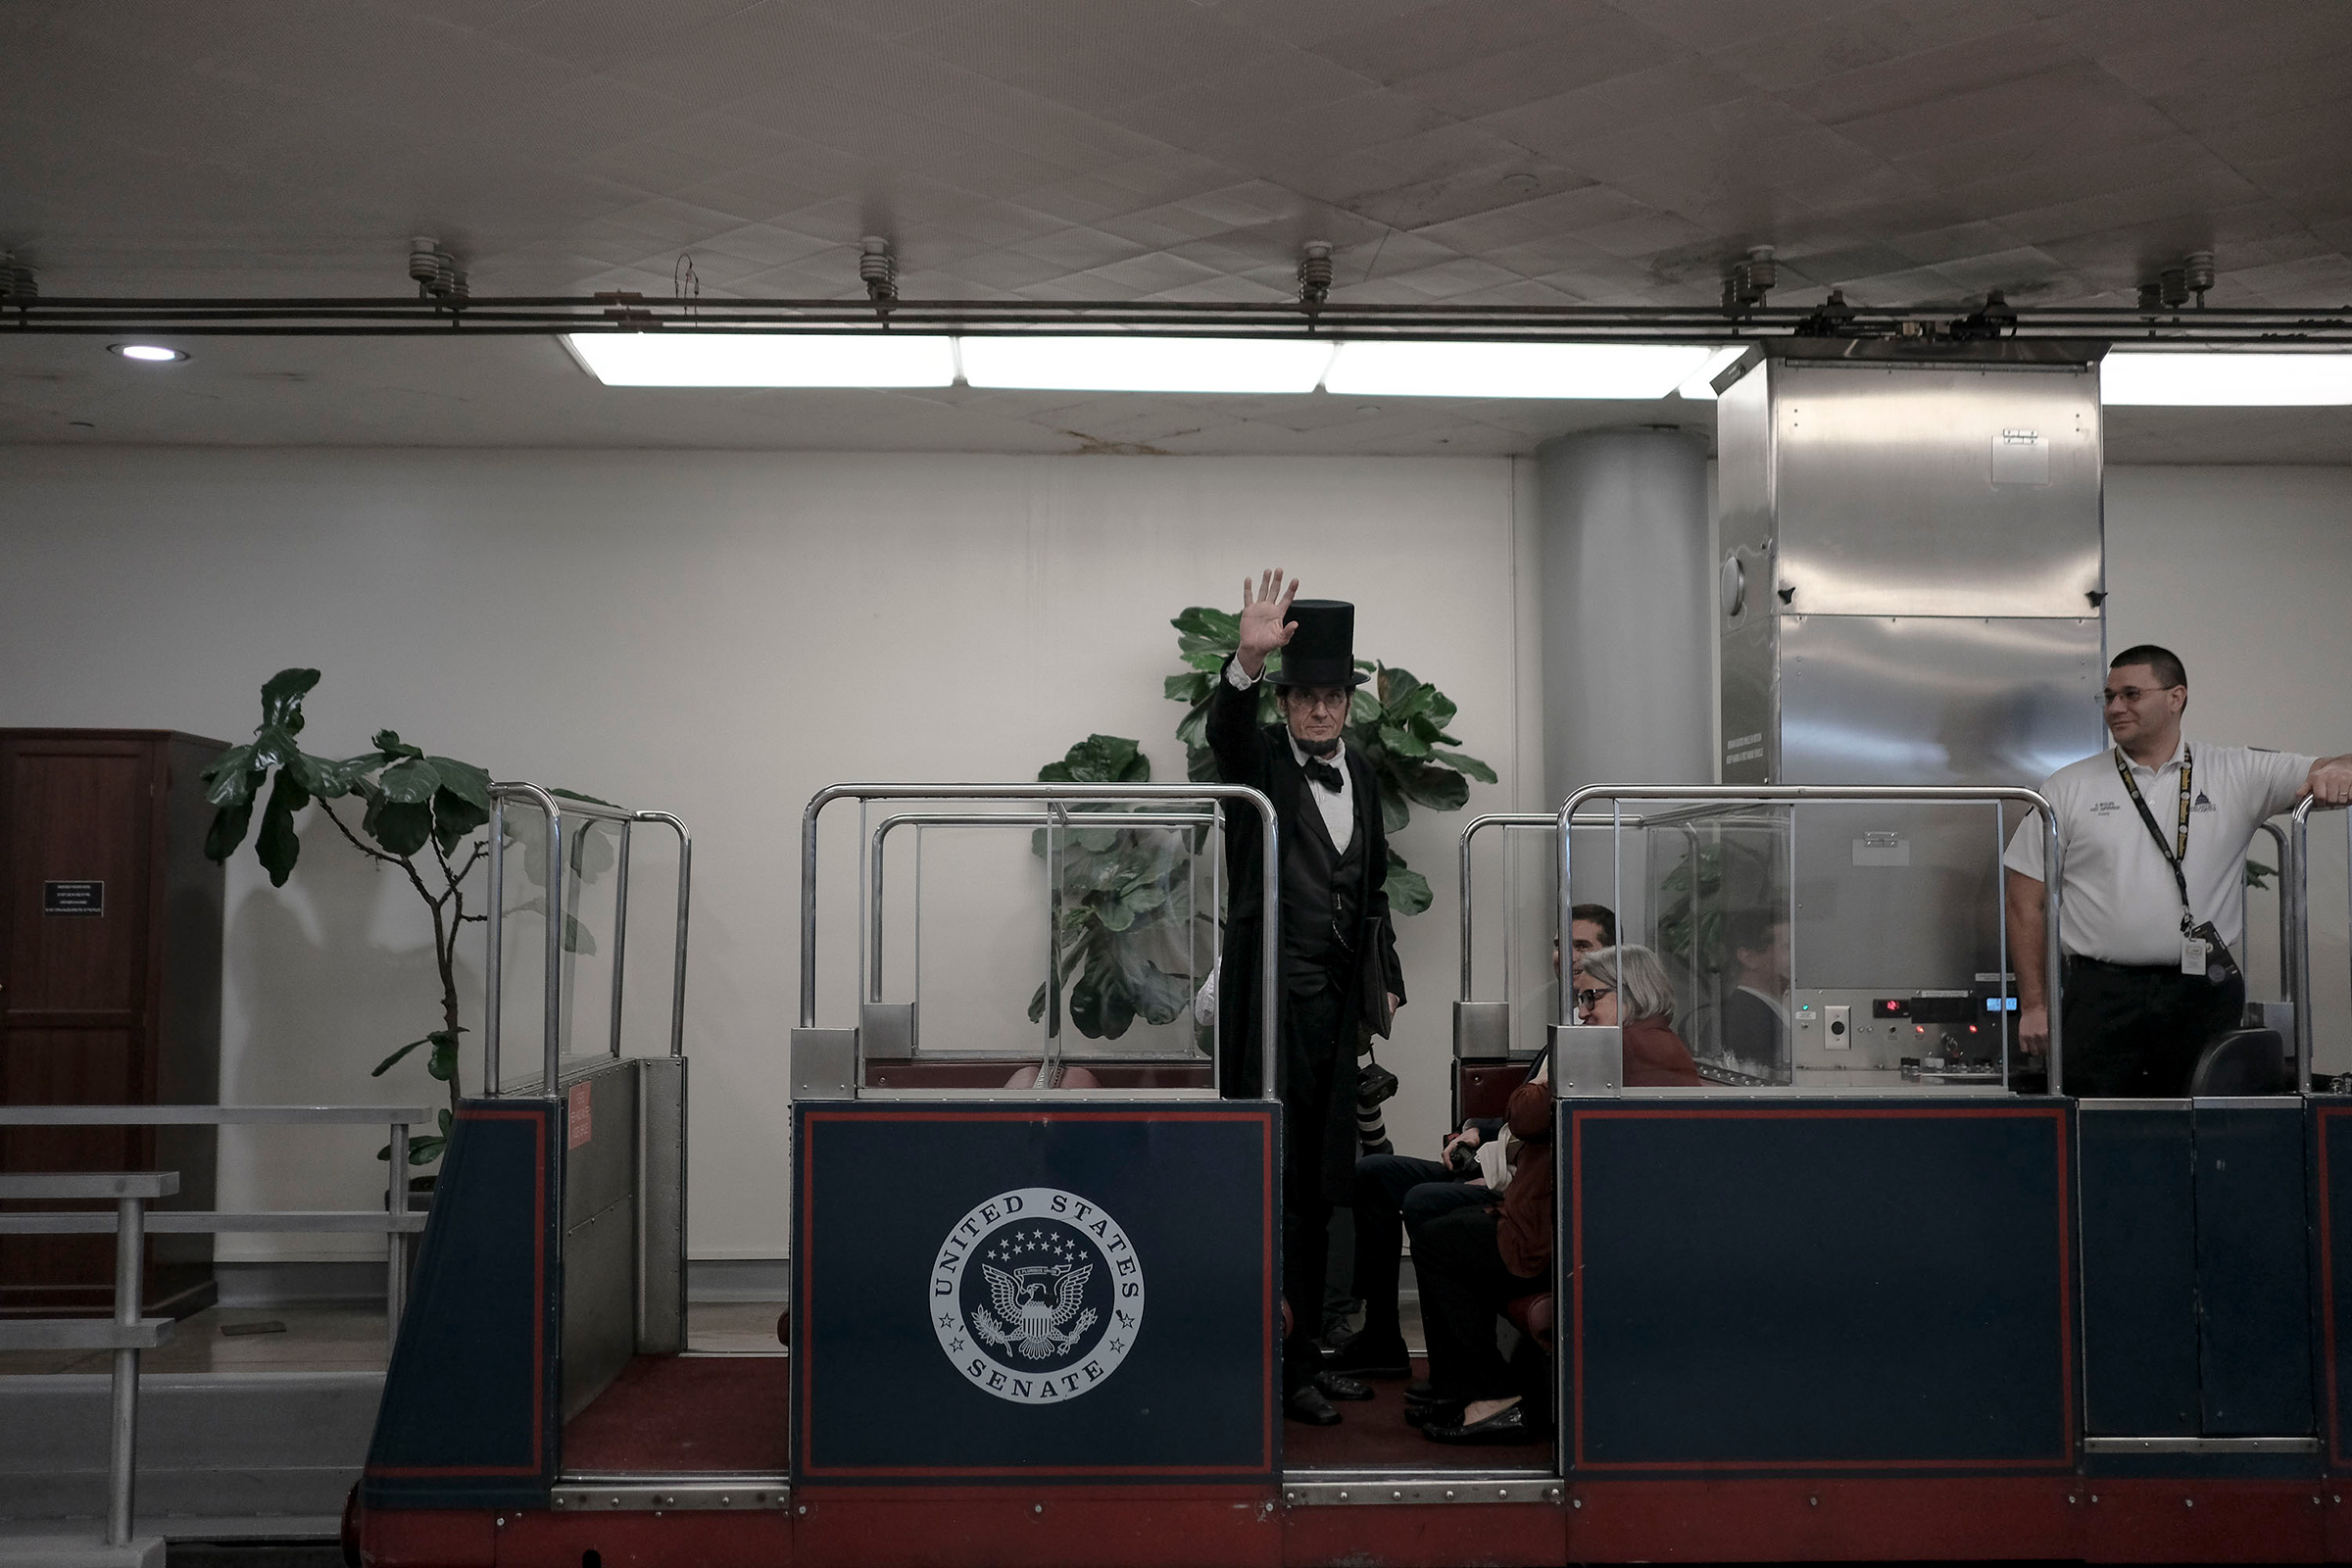 George Buss, a Lincoln impersonator, rides the Senate subway before the impeachment vote at the Capitol in Washington, D.C., on Feb. 5, 2020. (Gabriella Demczuk for TIME)